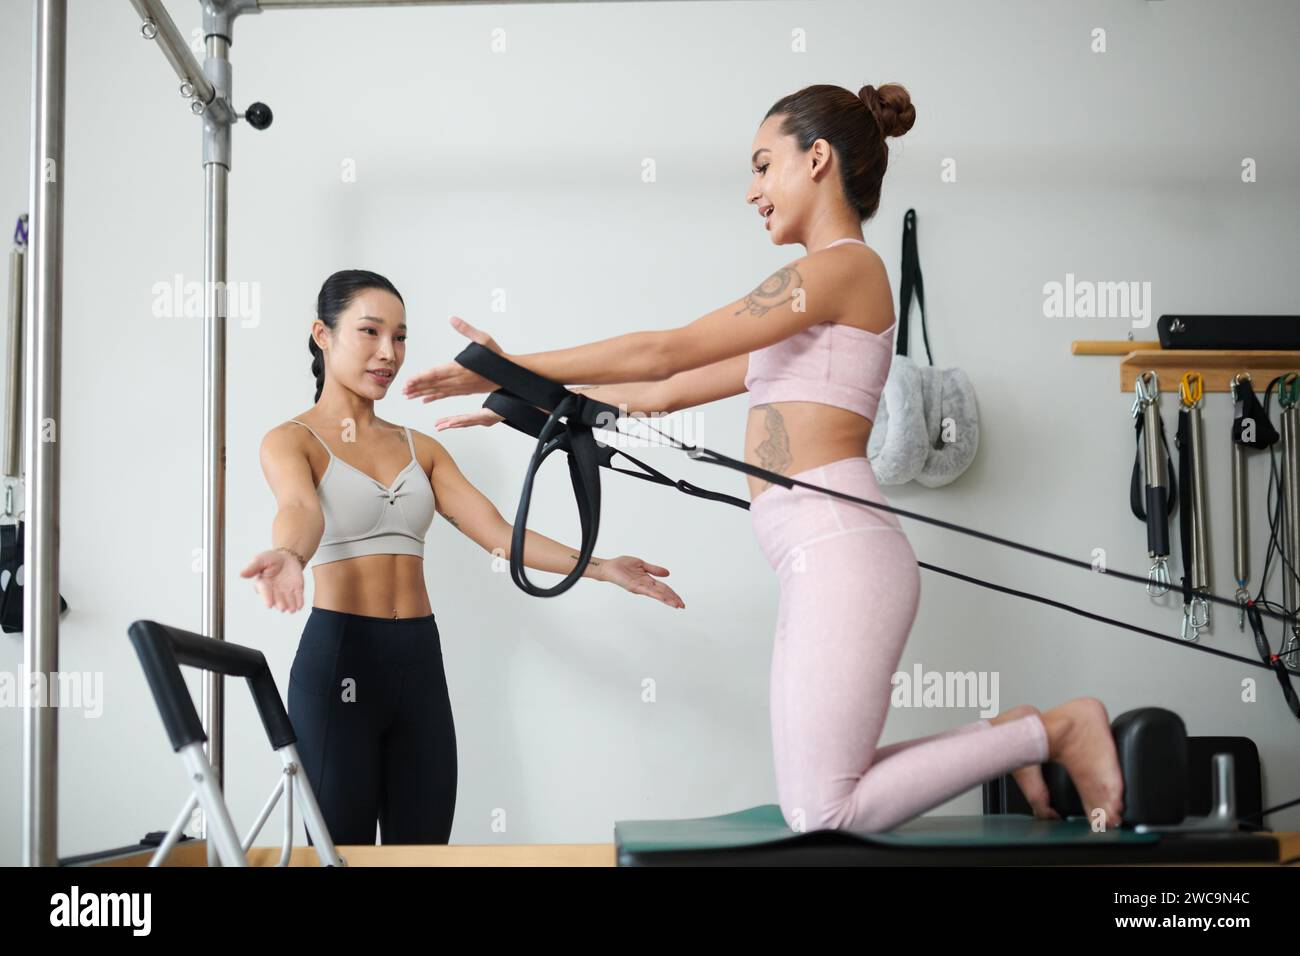 Fitness coach explaining client how to hold straps when work out in exercise machine Stock Photo